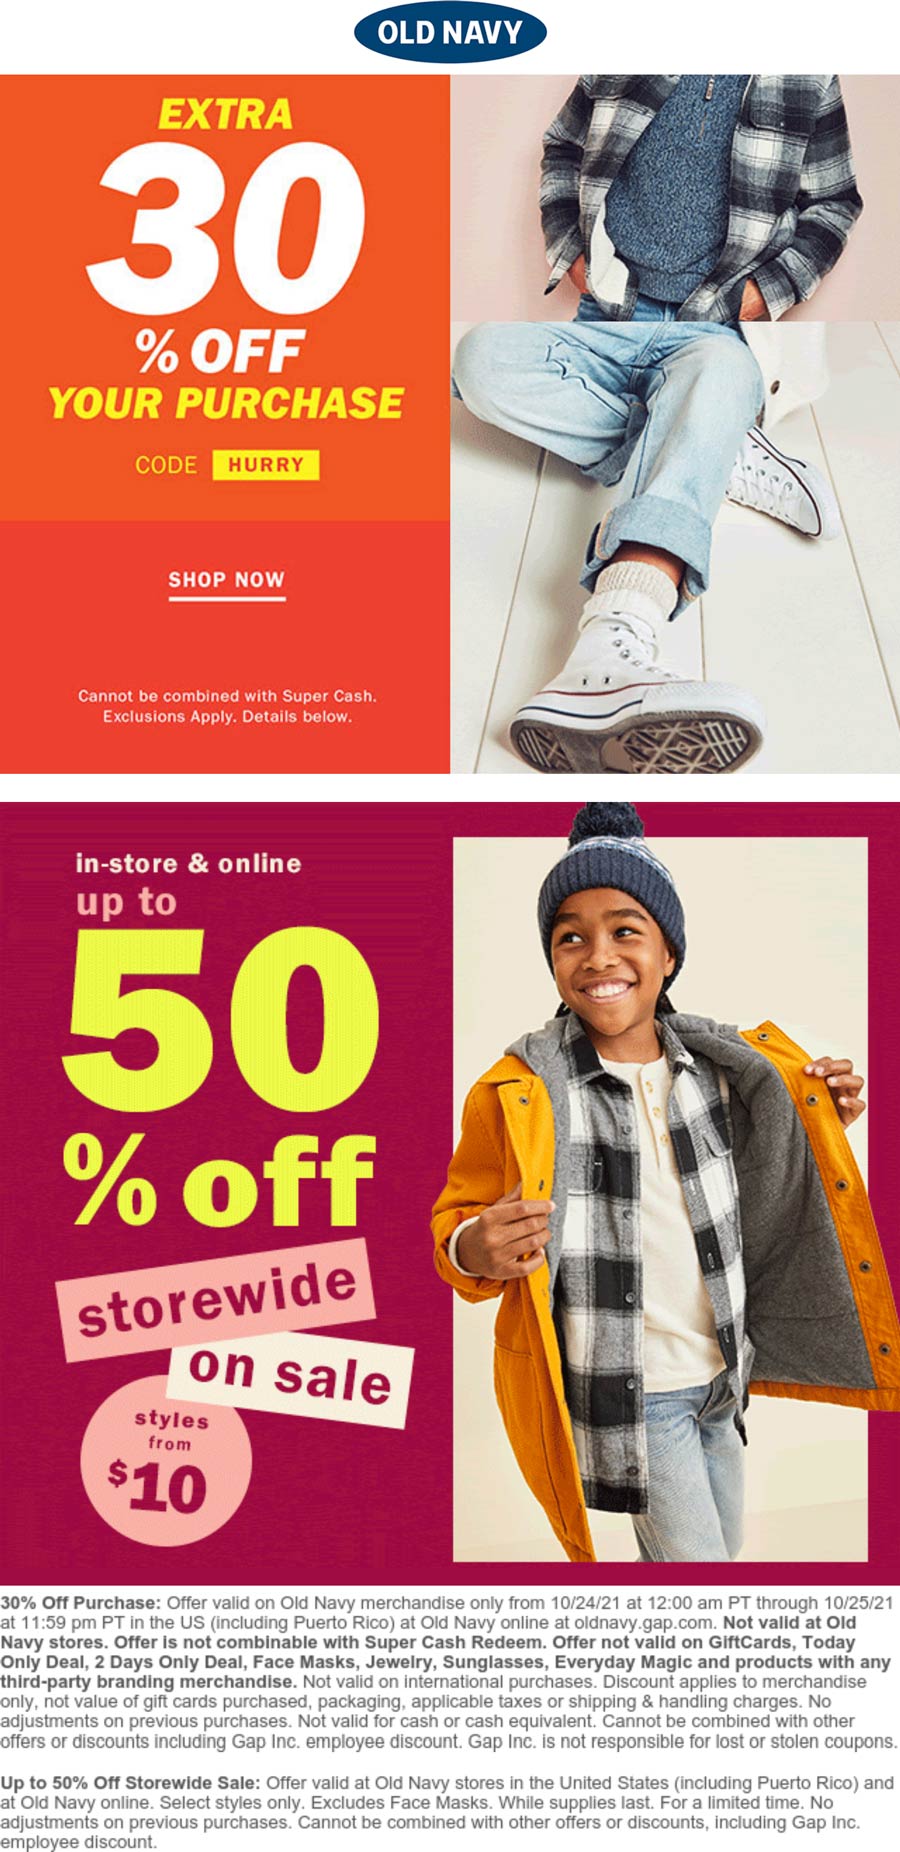 Old Navy stores Coupon  30%-50% off online today at Old Navy via promo code HURRY #oldnavy 